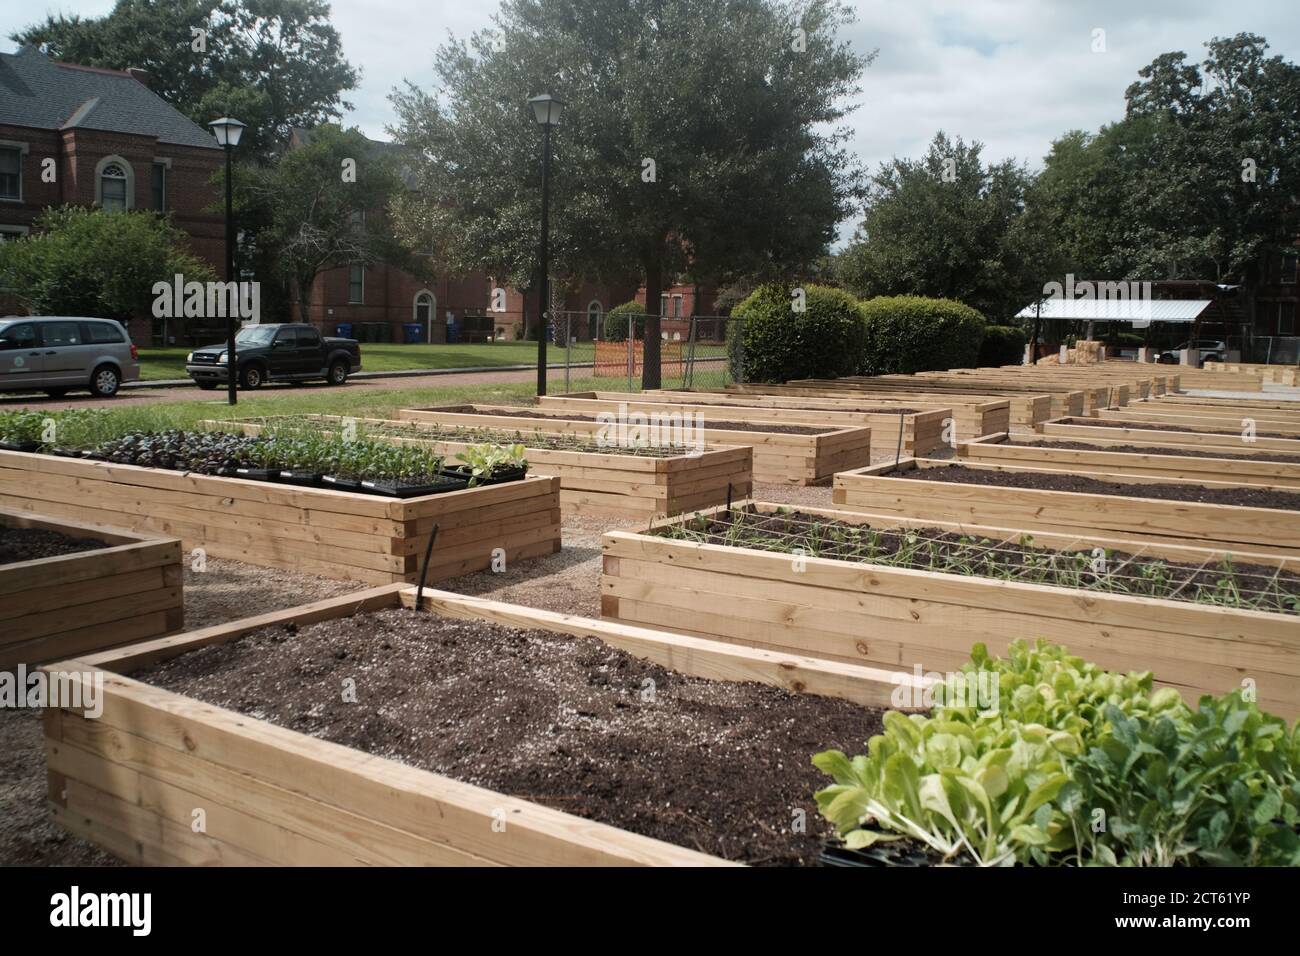 Constructing New Urban Garden on Site of 1850s English Village Built by 19th Century Furniture Maker, William Enston, Who Lived in Charleston, SC. Stock Photo